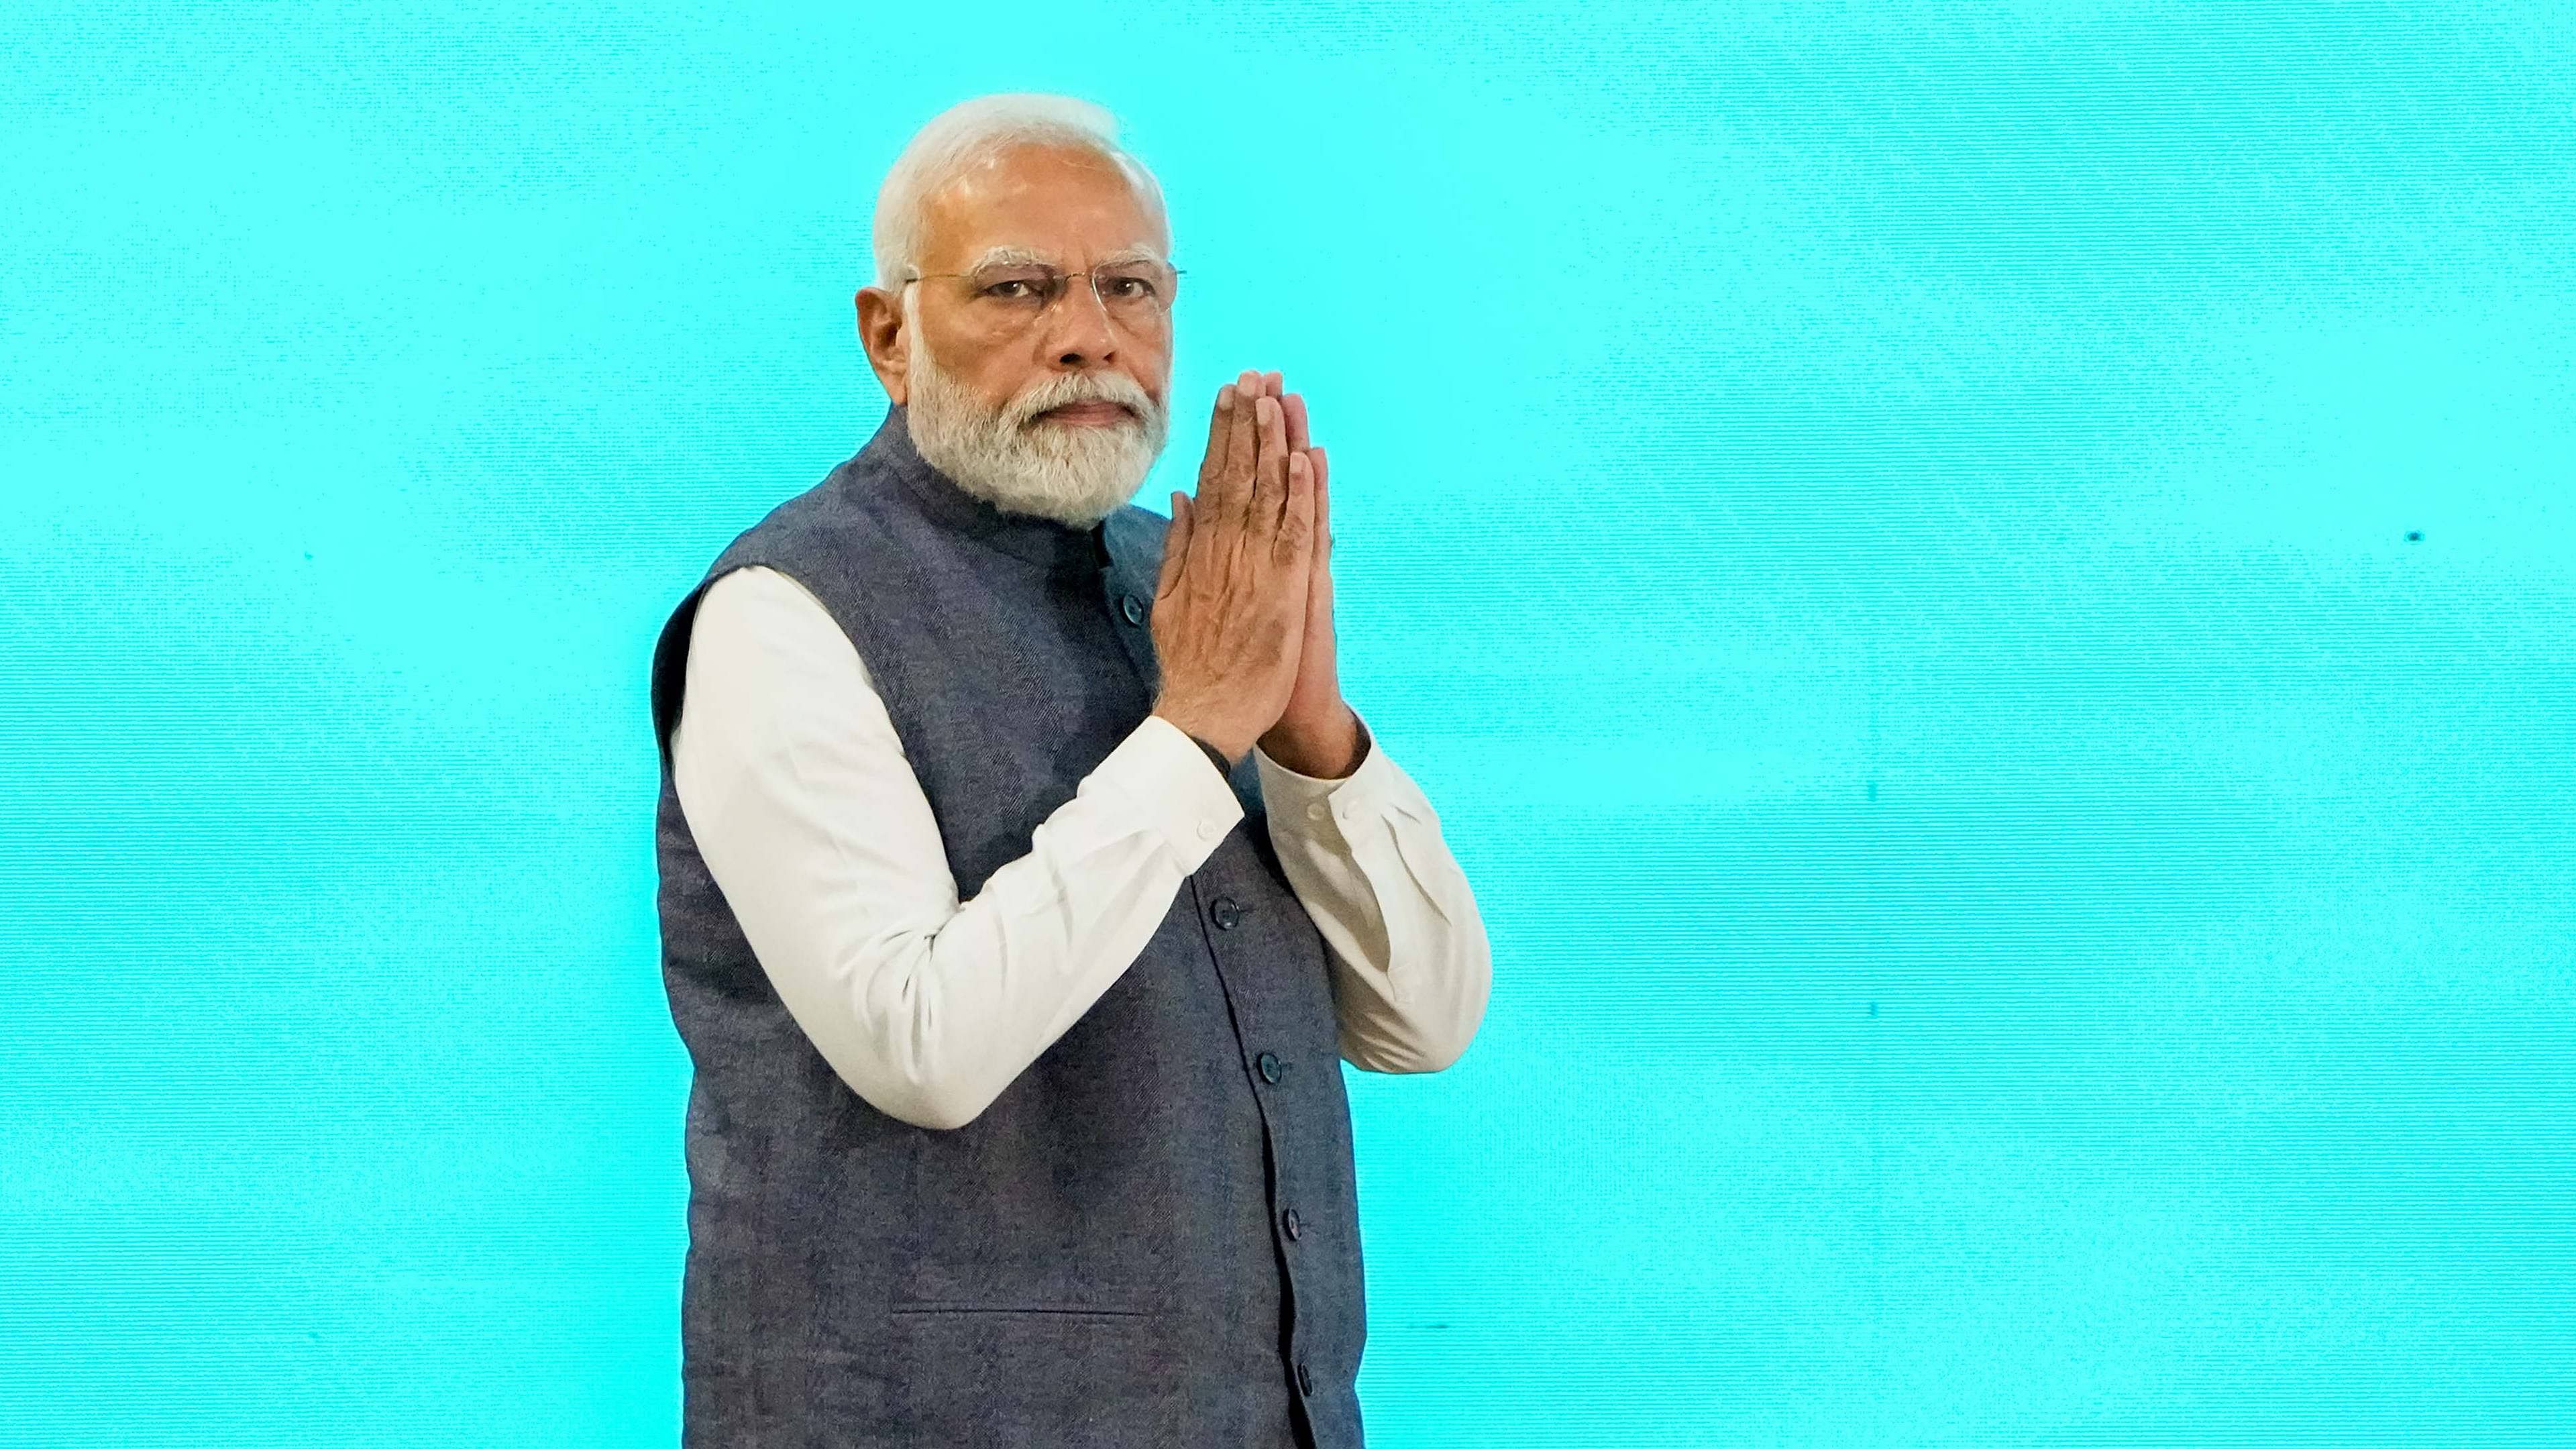 Prime Minister Narendra Modi during the inauguration of the 'India Energy Week 2023' in Bengaluru, Monday, Feb. 6, 2023. Credit: PTI Photo